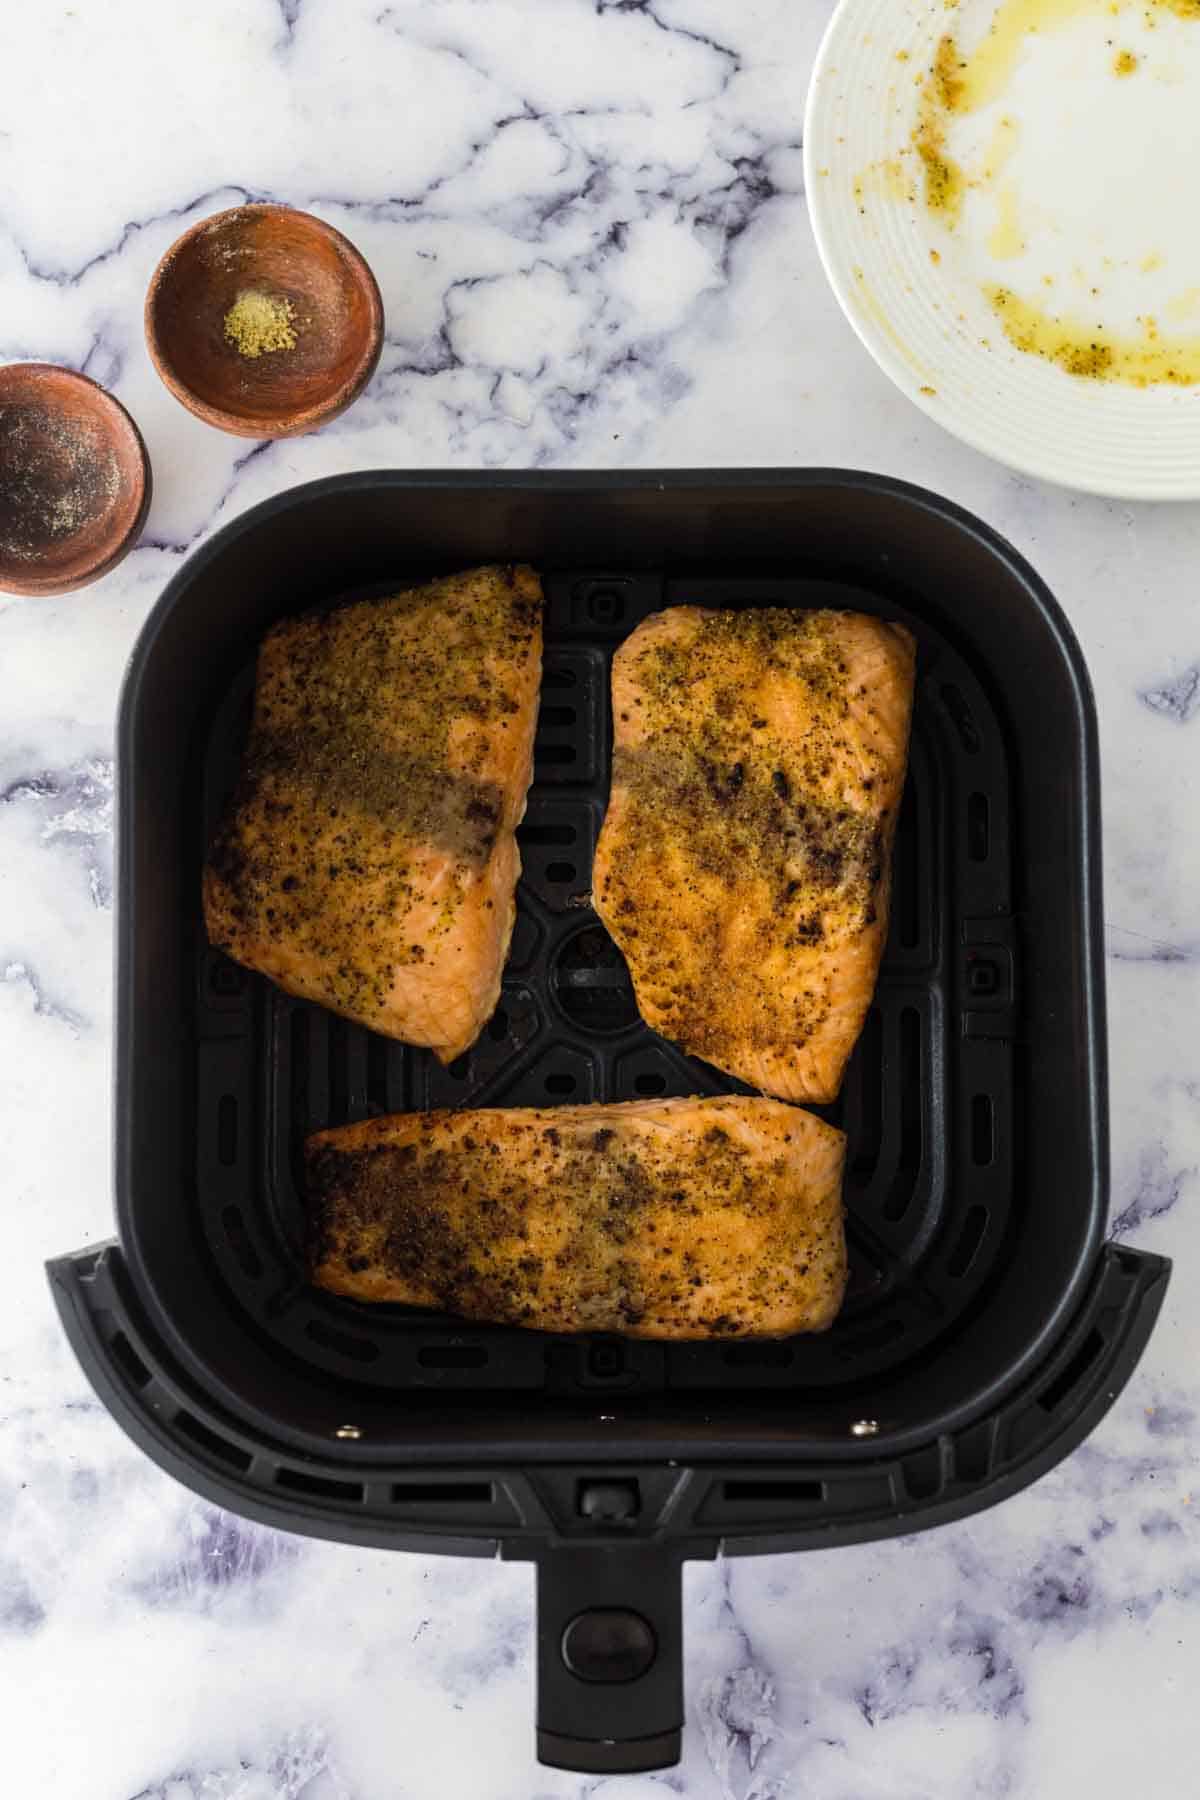 Salmon filets in the air fryer.